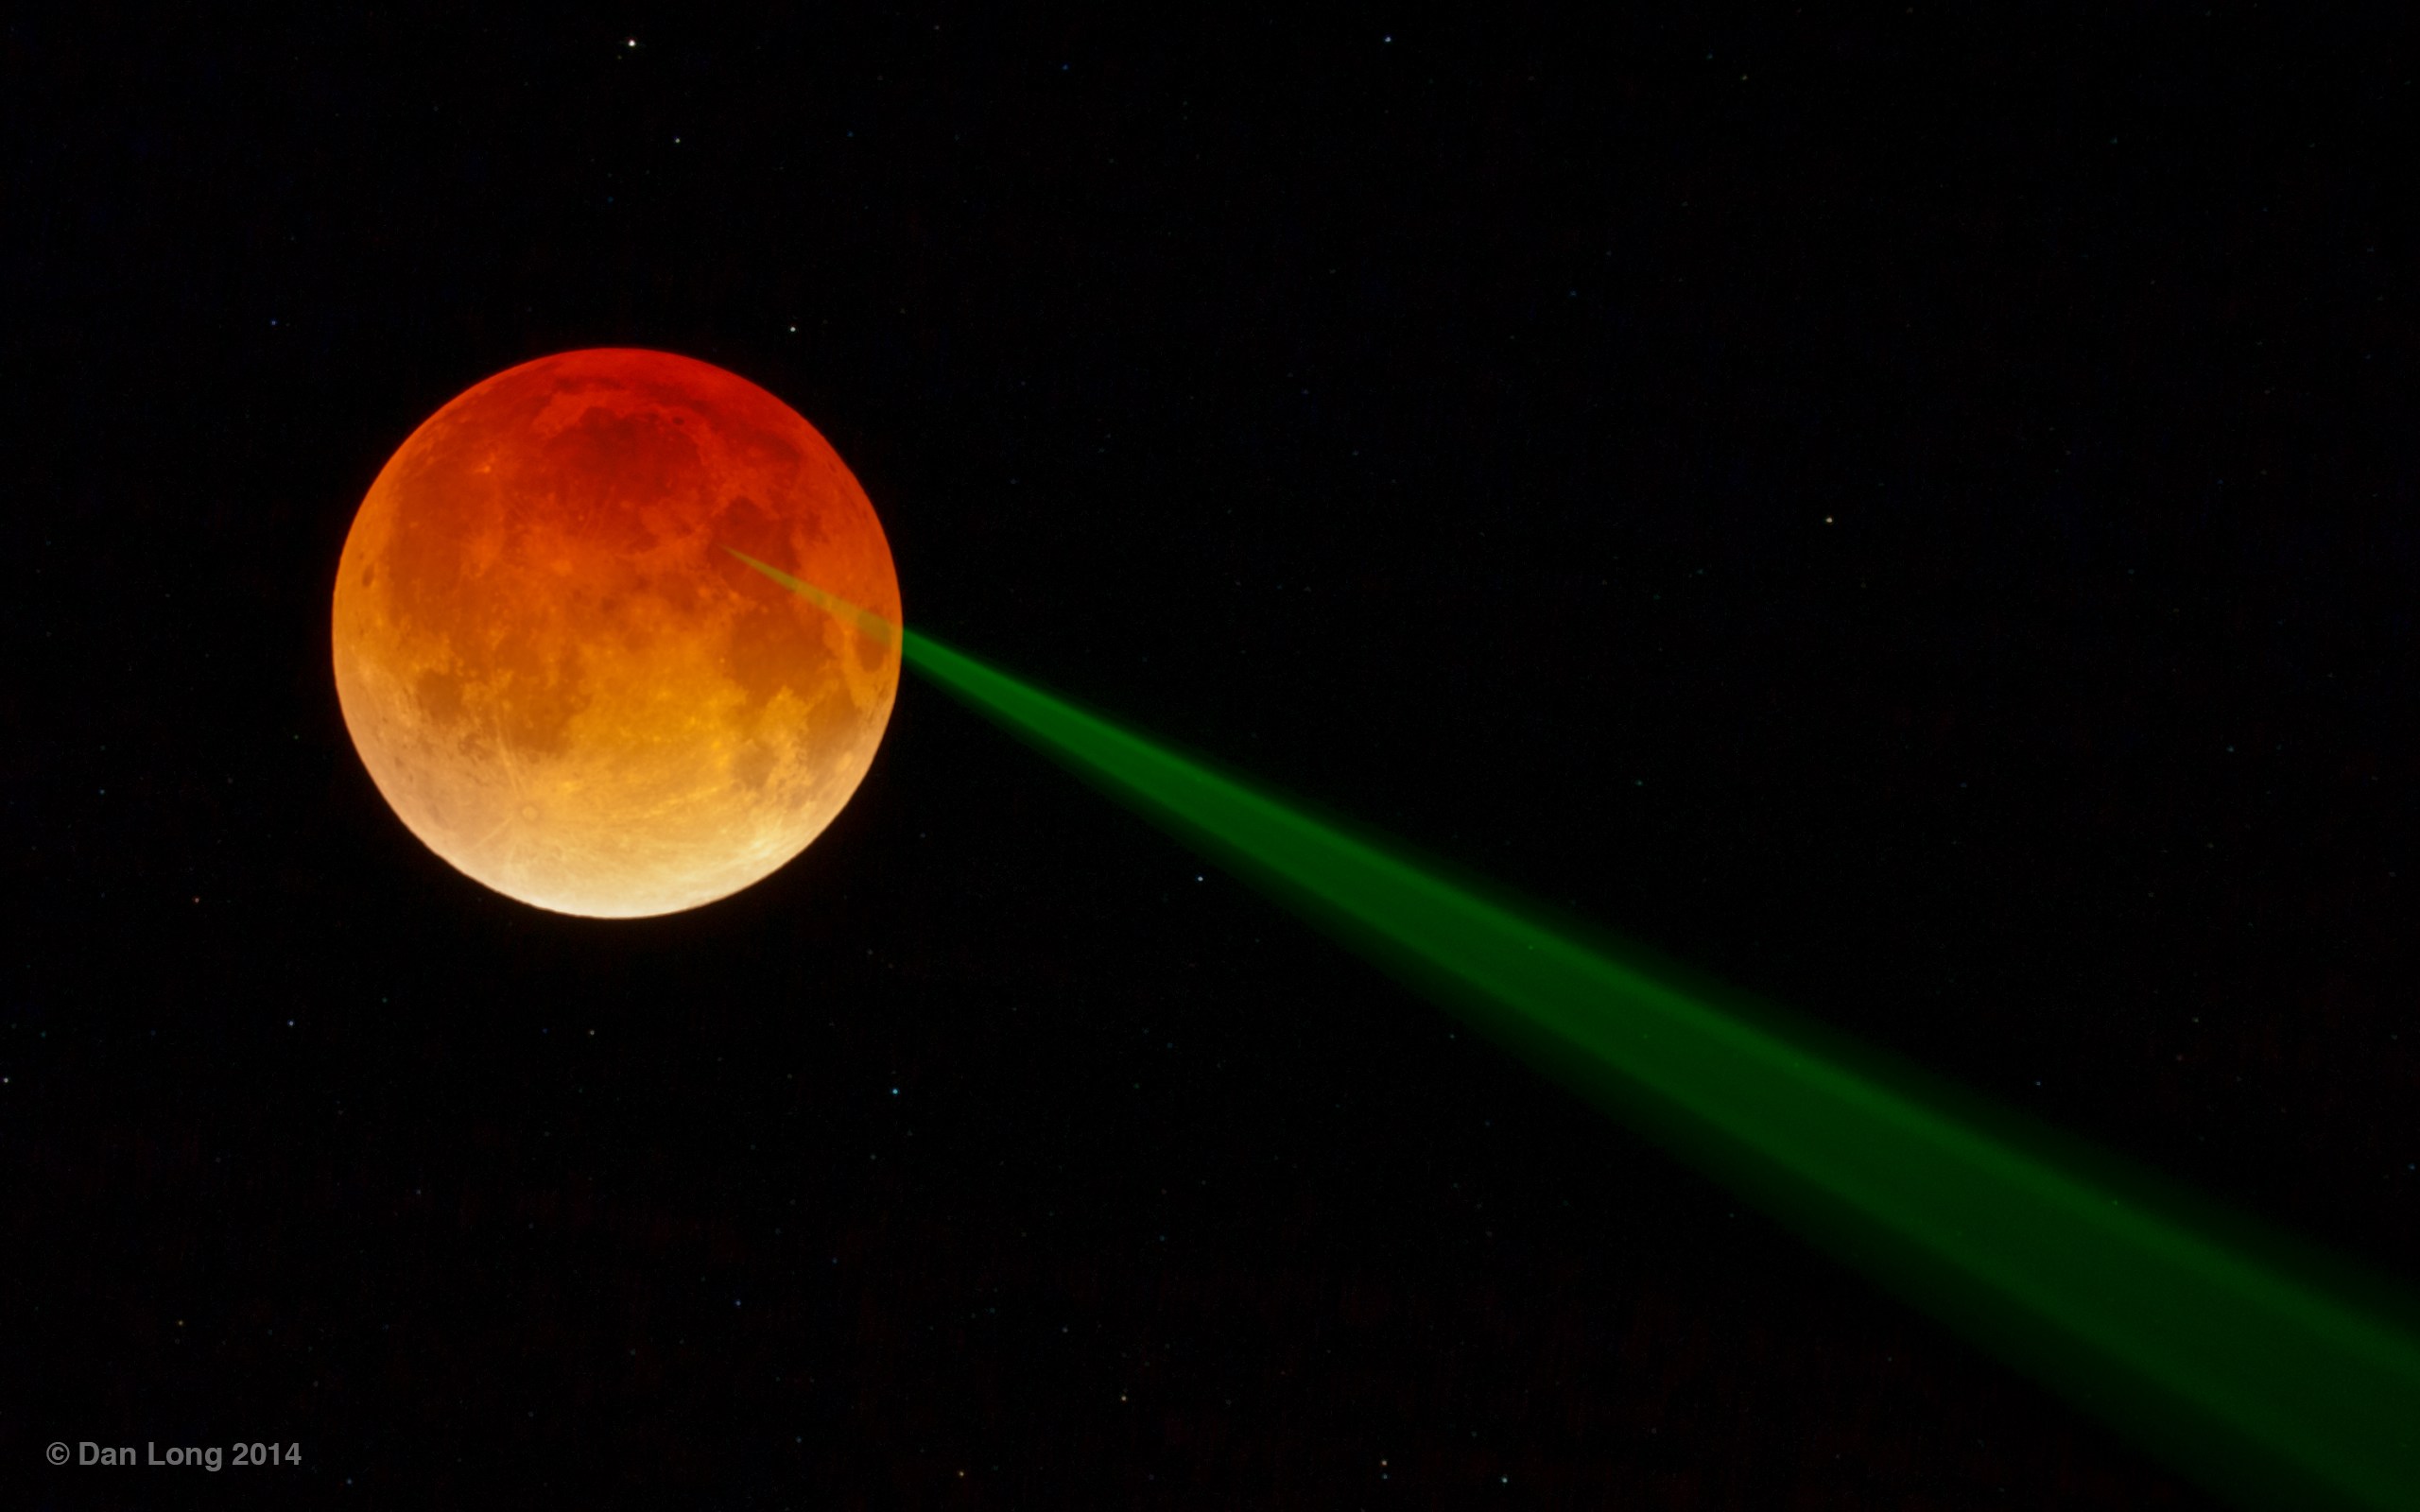 Eclipsed moon under fire